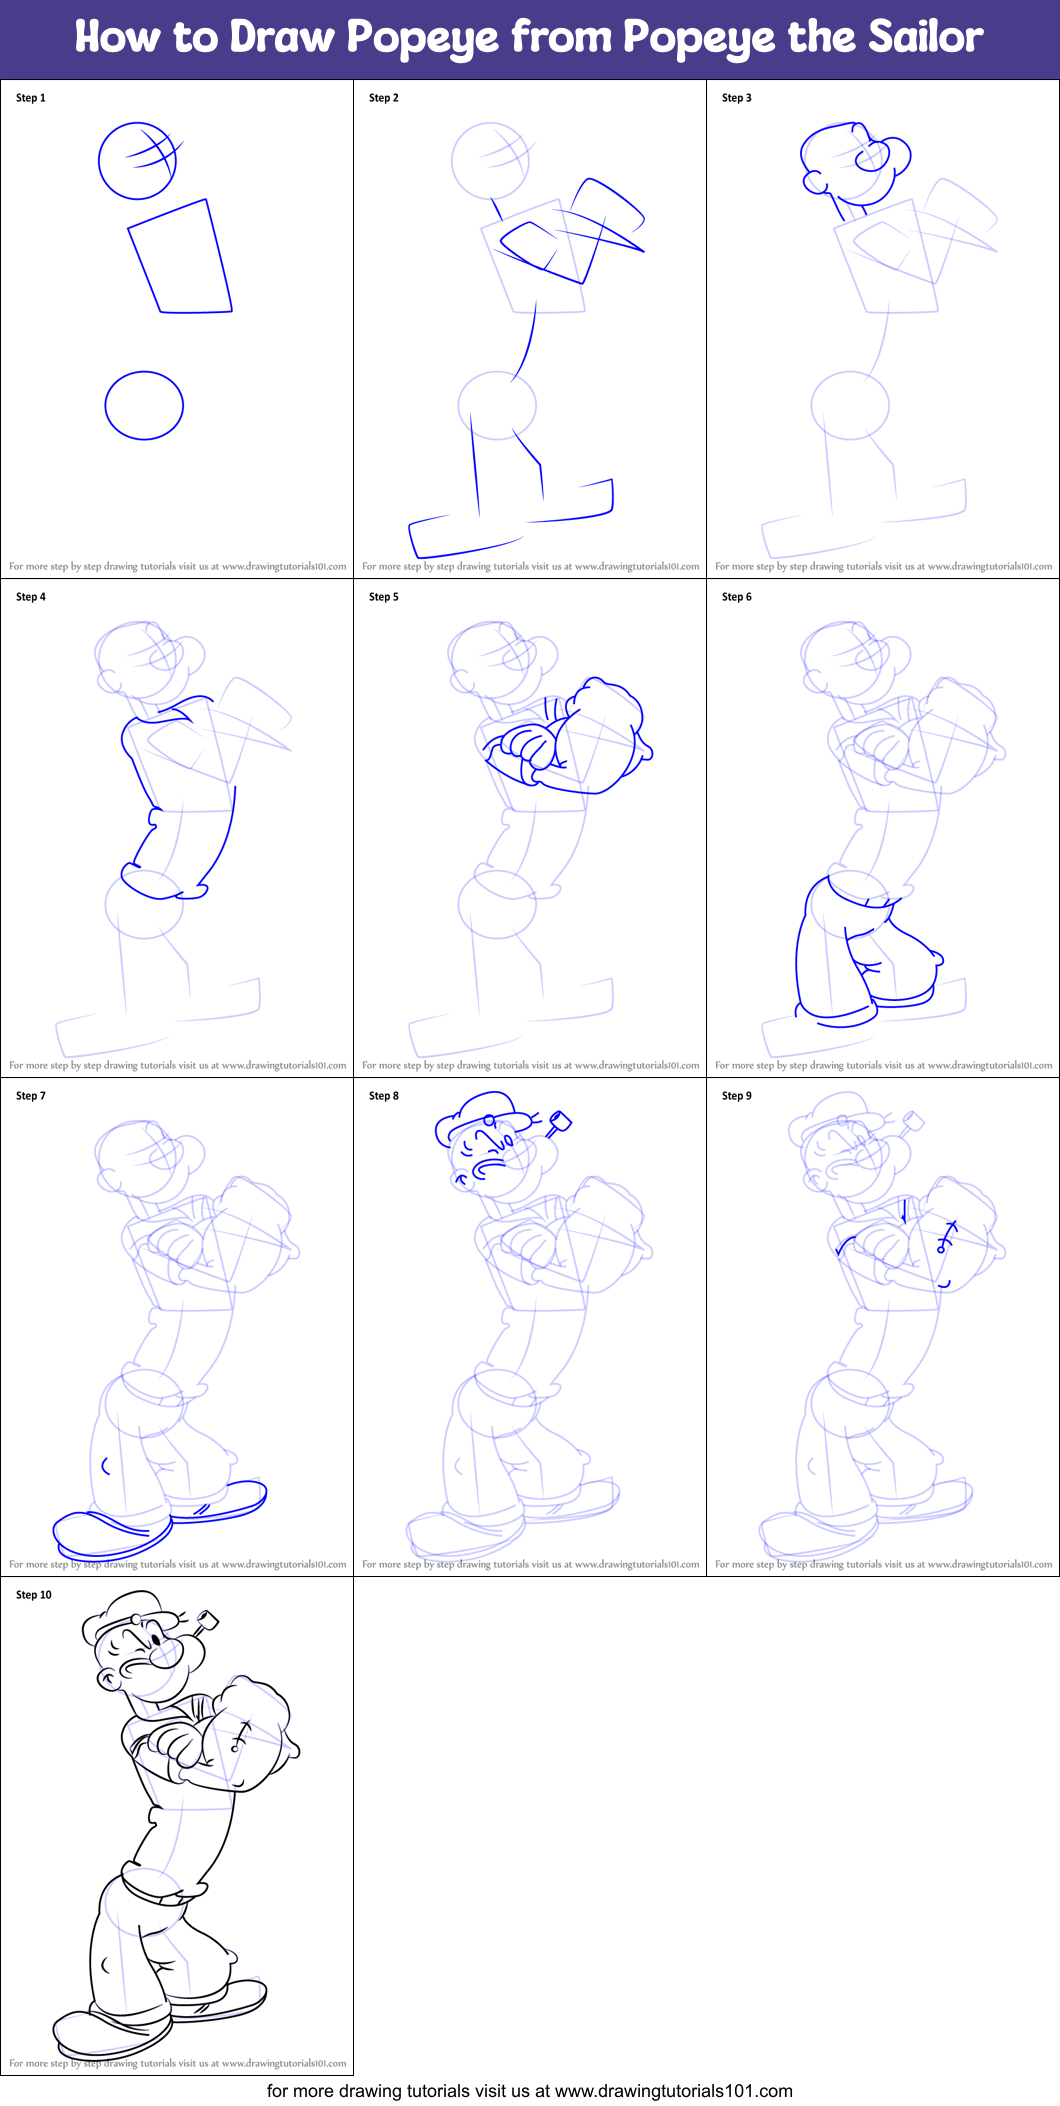 How to Draw Popeye from Popeye the Sailor printable step by step